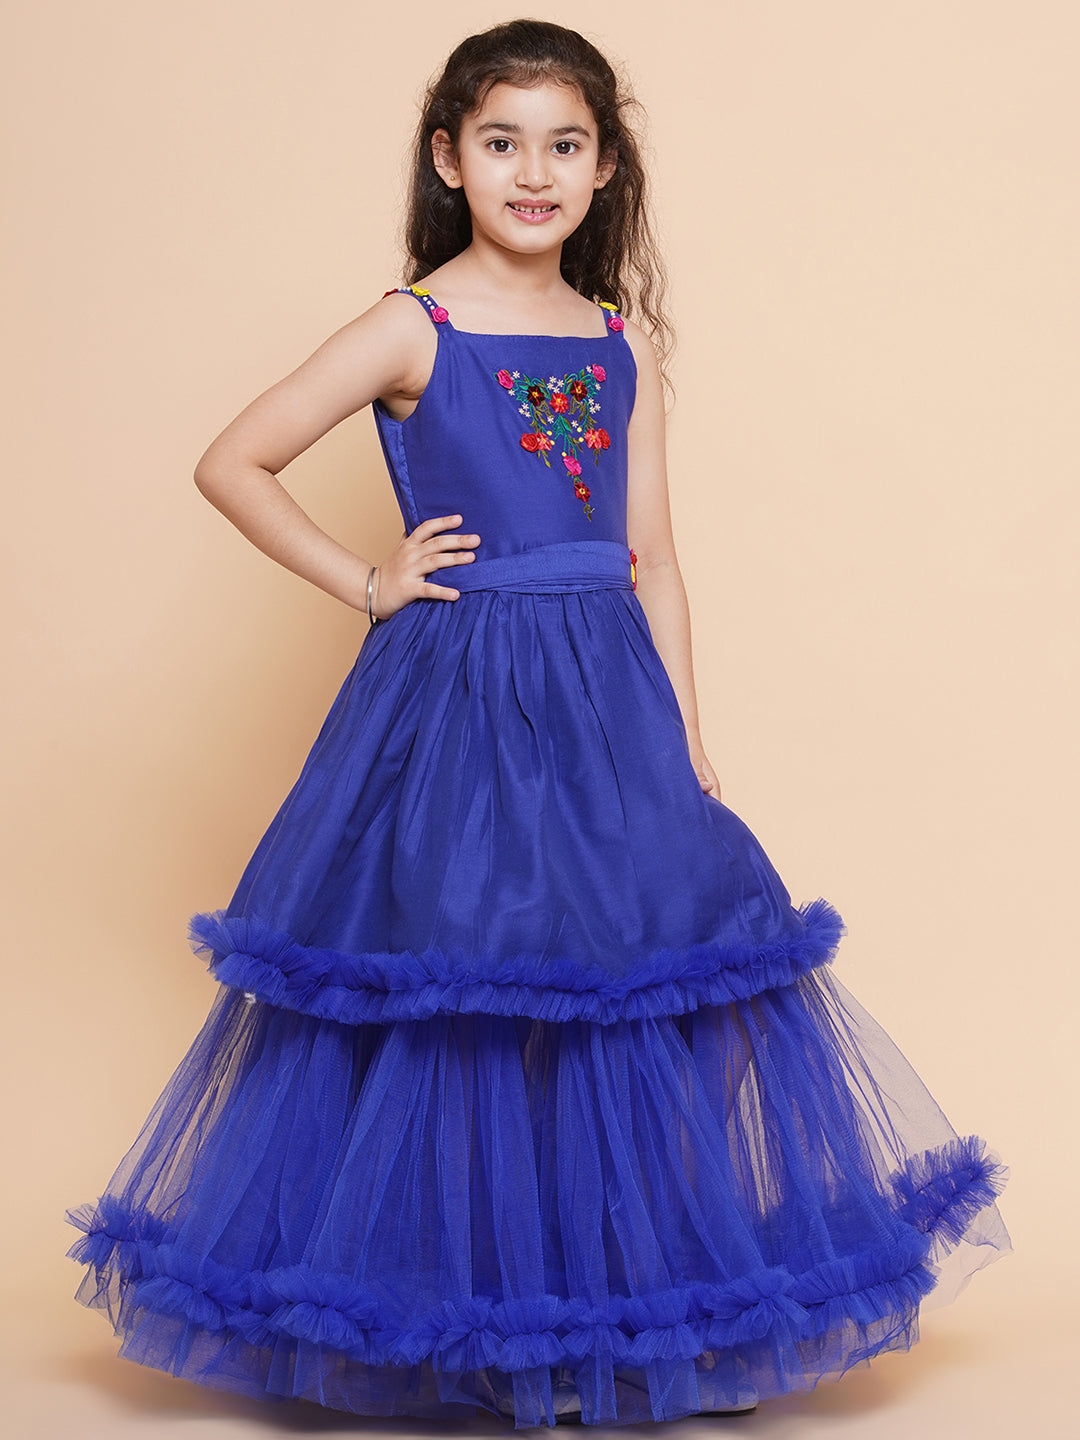 Bitiya by Bhama 
Girls Floral Embroidered Satin Fit & Flare  Dress